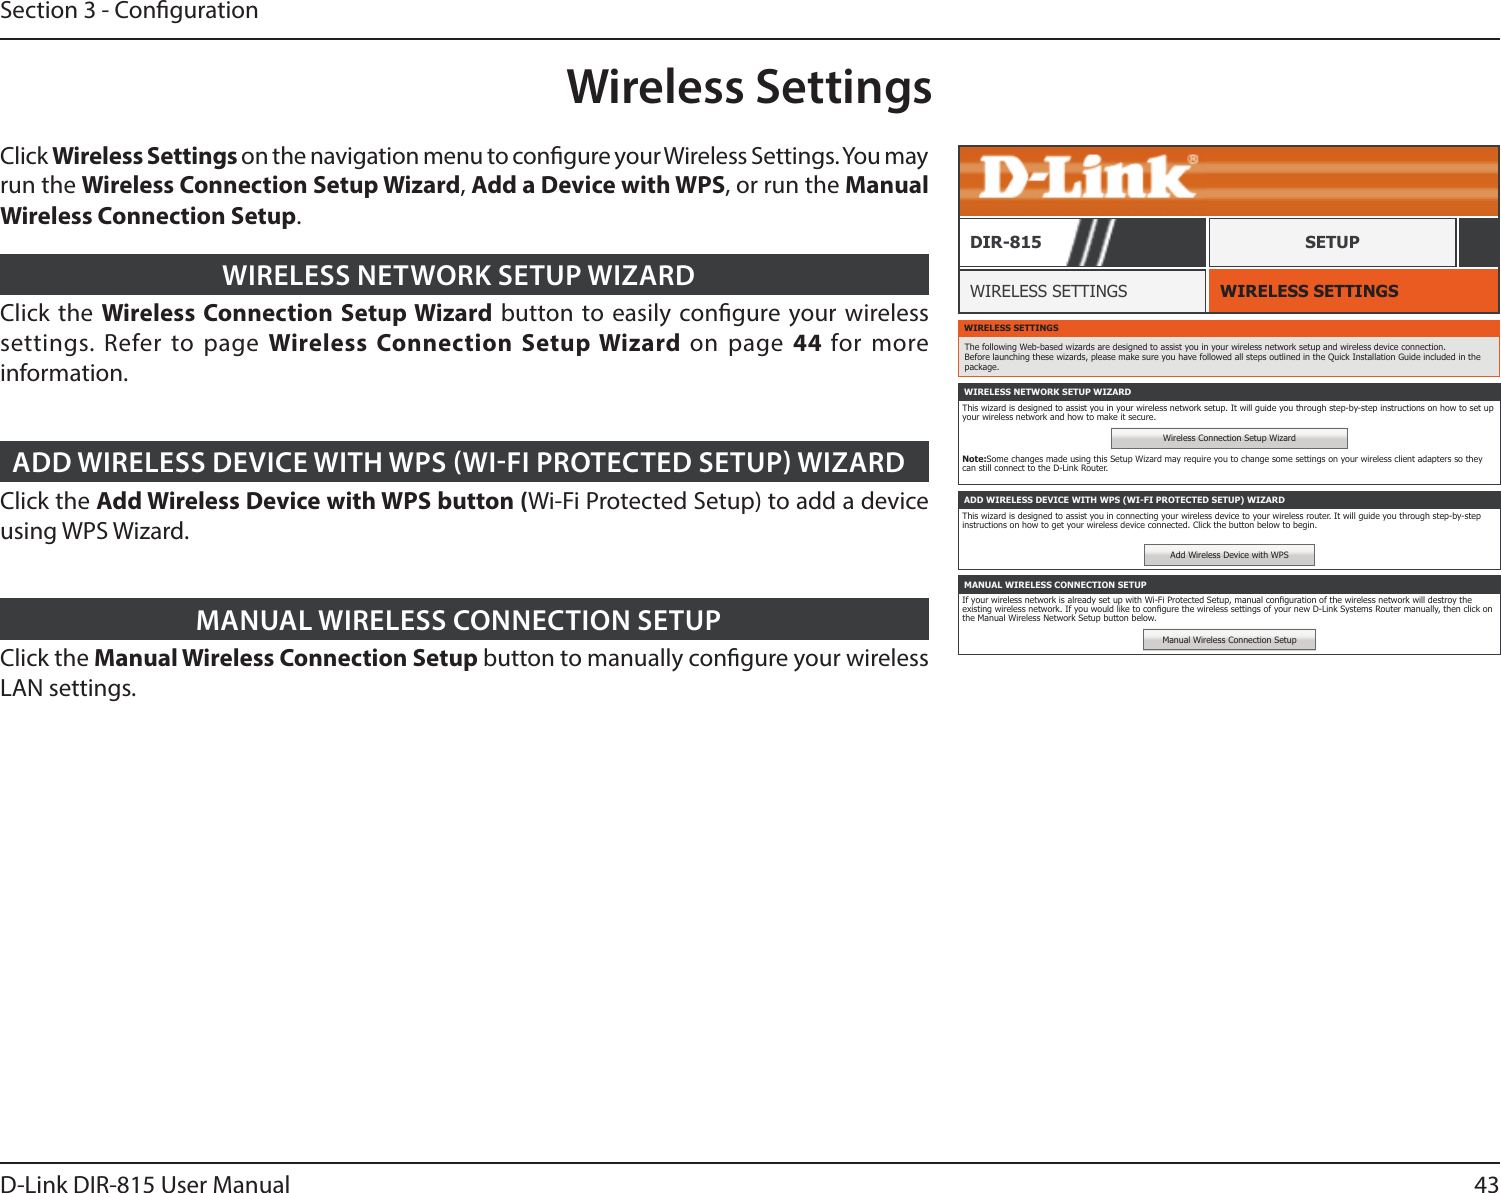 43D-Link DIR-815 User ManualSection 3 - CongurationWireless SettingsWIRELESS SETTINGSWIRELESS SETTINGSDIR-815 SETUPClick the Wireless Connection Setup Wizard button to easily congure your wireless settings. Refer to page Wireless Connection Setup Wizard on page 44  for more information.WIRELESS NETWORK SETUP WIZARDClick the Add Wireless Device with WPS button (Wi-Fi Protected Setup) to add a device using WPS Wizard.ADD WIRELESS DEVICE WITH WPS WIFI PROTECTED SETUP WIZARDClick the Manual Wireless Connection Setup button to manually congure your wireless LAN settings. MANUAL WIRELESS CONNECTION SETUPWIRELESS SETTINGSThe following Web-based wizards are designed to assist you in your wireless network setup and wireless device connection. Before launching these wizards, please make sure you have followed all steps outlined in the Quick Installation Guide included in the package.WIRELESS NETWORK SETUP WIZARDThis wizard is designed to assist you in your wireless network setup. It will guide you through step-by-step instructions on how to set up your wireless network and how to make it secure.Wireless Connection Setup WizardNote:Some changes made using this Setup Wizard may require you to change some settings on your wireless client adapters so they can still connect to the D-Link Router.ADD WIRELESS DEVICE WITH WPS (WI-FI PROTECTED SETUP) WIZARDThis wizard is designed to assist you in connecting your wireless device to your wireless router. It will guide you through step-by-step instructions on how to get your wireless device connected. Click the button below to begin.Add Wireless Device with WPSMANUAL WIRELESS CONNECTION SETUPIf your wireless network is already set up with Wi-Fi Protected Setup, manual conguration of the wireless network will destroy the existing wireless network. If you would like to congure the wireless settings of your new D-Link Systems Router manually, then click on the Manual Wireless Network Setup button below.Manual Wireless Connection SetupClick Wireless Settings on the navigation menu to congure your Wireless Settings. You may run the Wireless Connection Setup Wizard, Add a Device with WPS, or run the Manual Wireless Connection Setup.